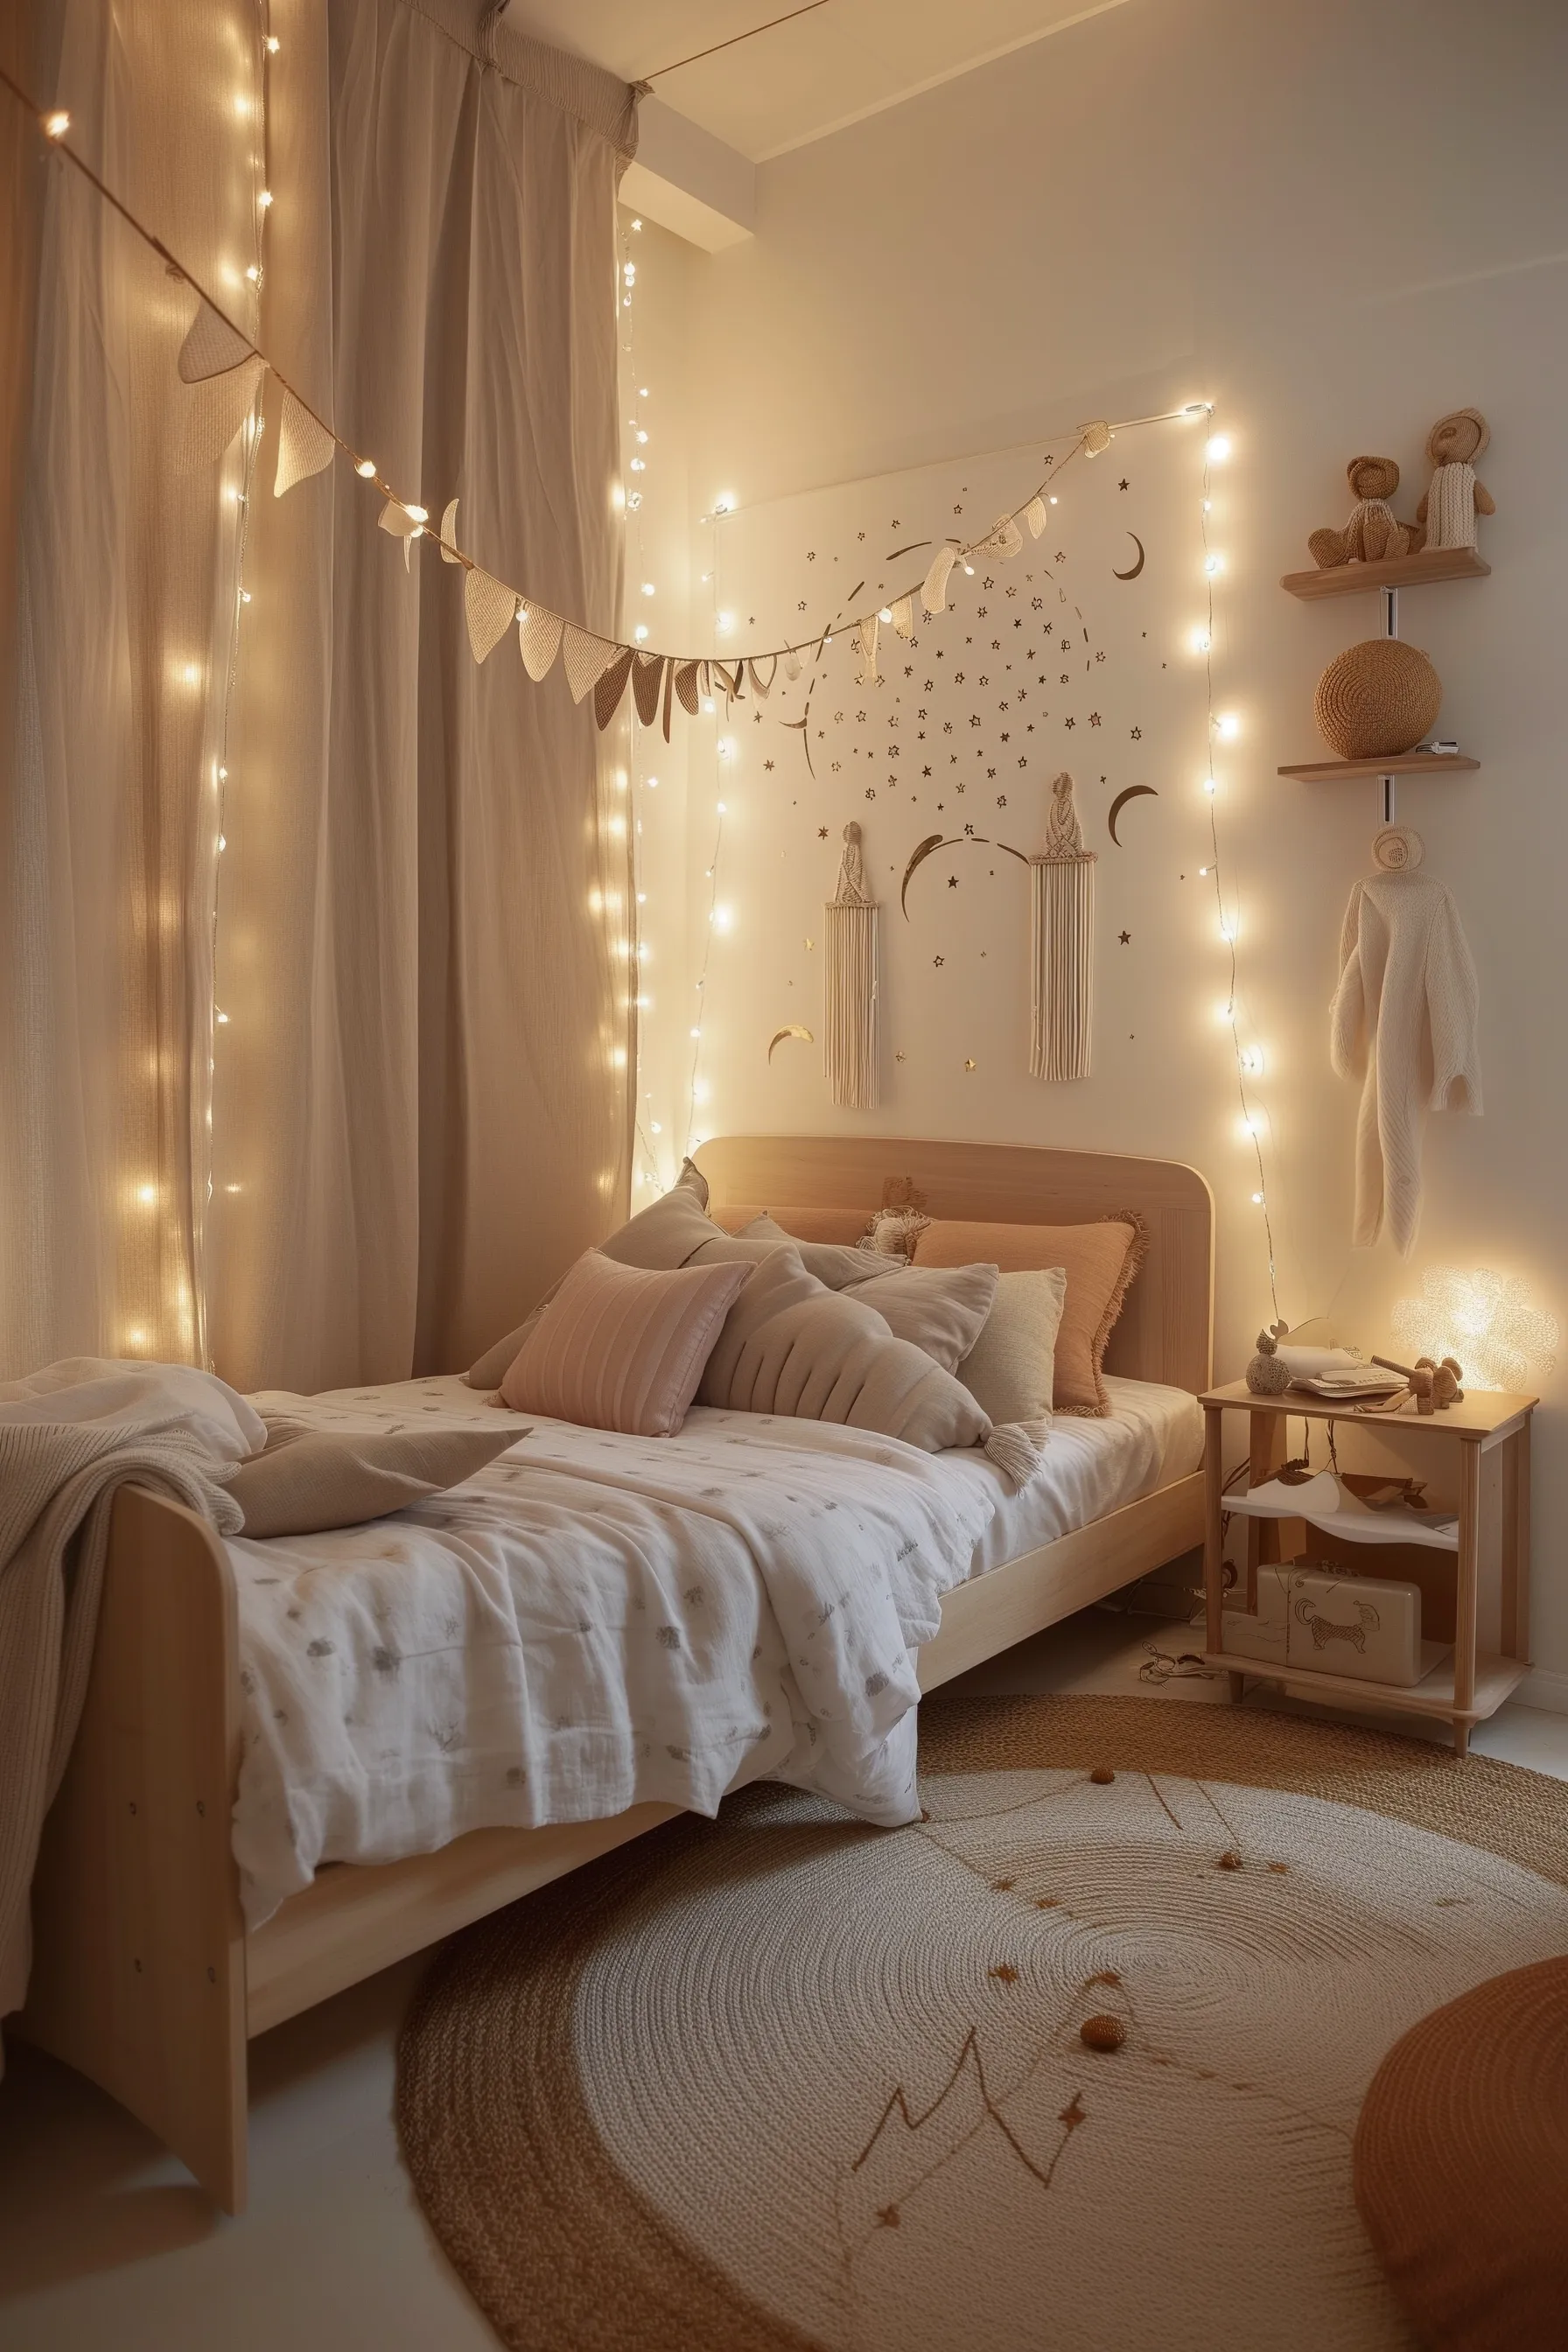 A white and brown childs bedroom with a large area rug and fairy lights